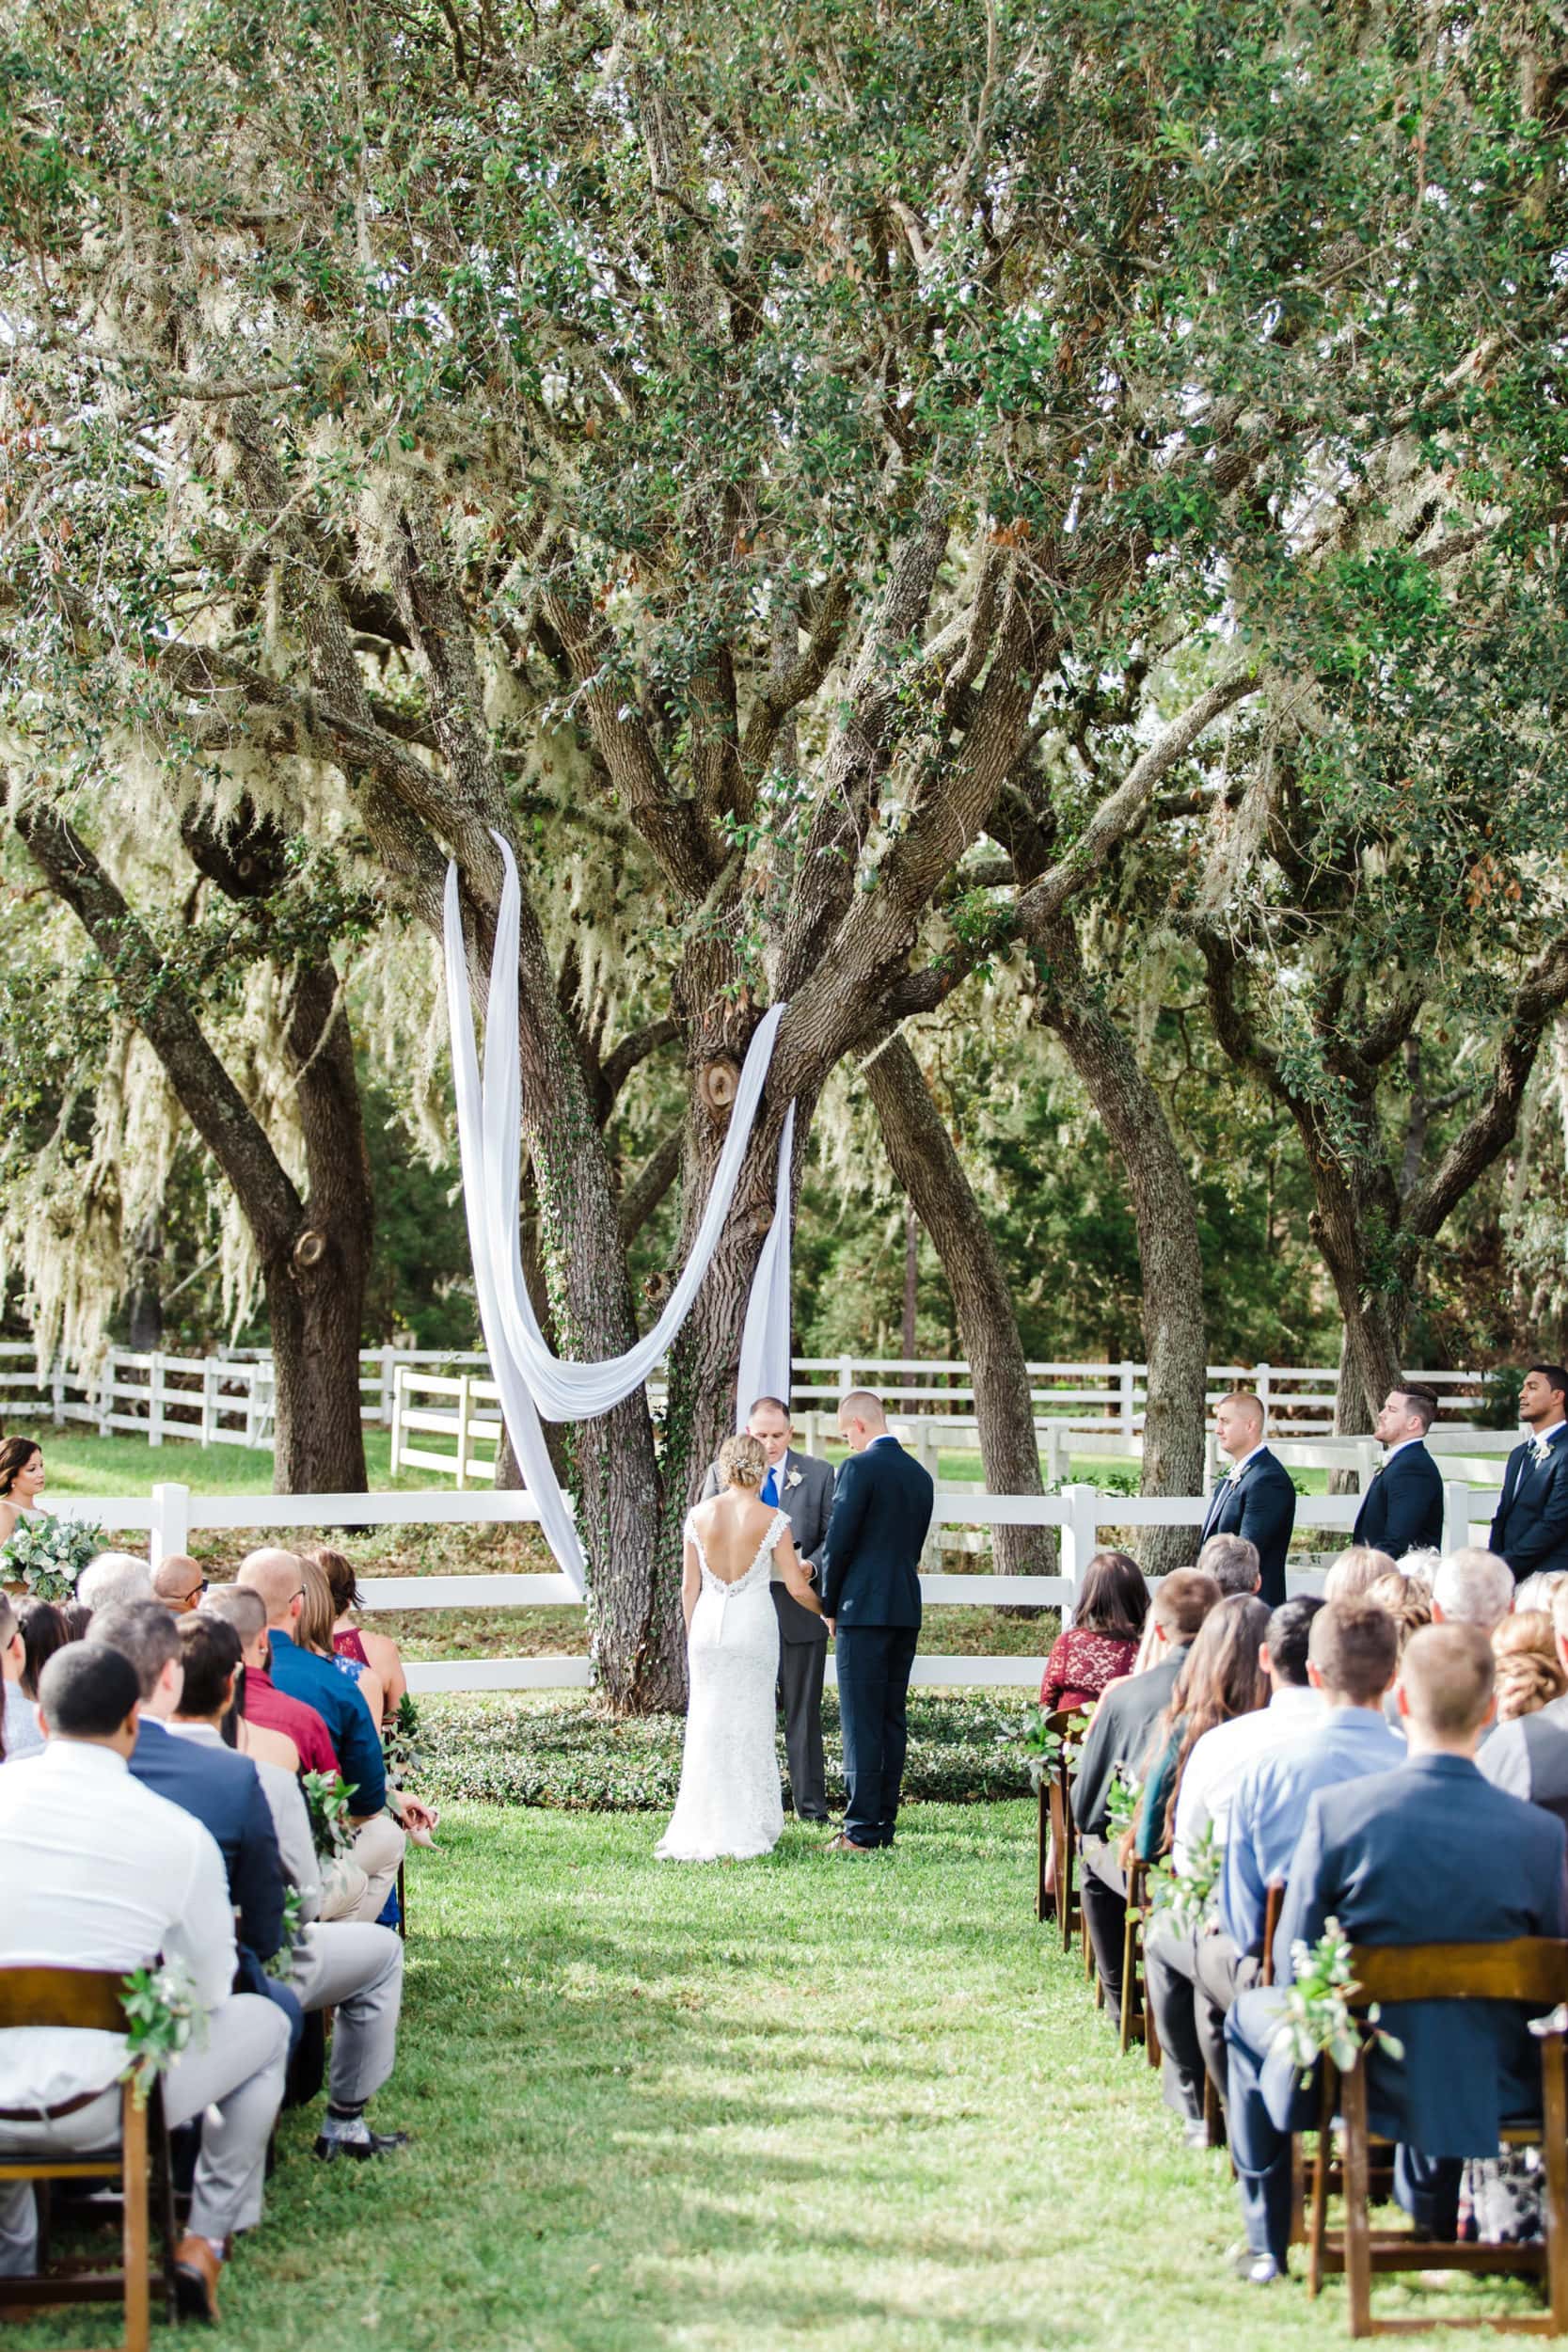 bride in casablanca gown standing next to groom in navy suit from express under oak tree during ceremony at bramble tree estate with white fabric hanging from tree branches